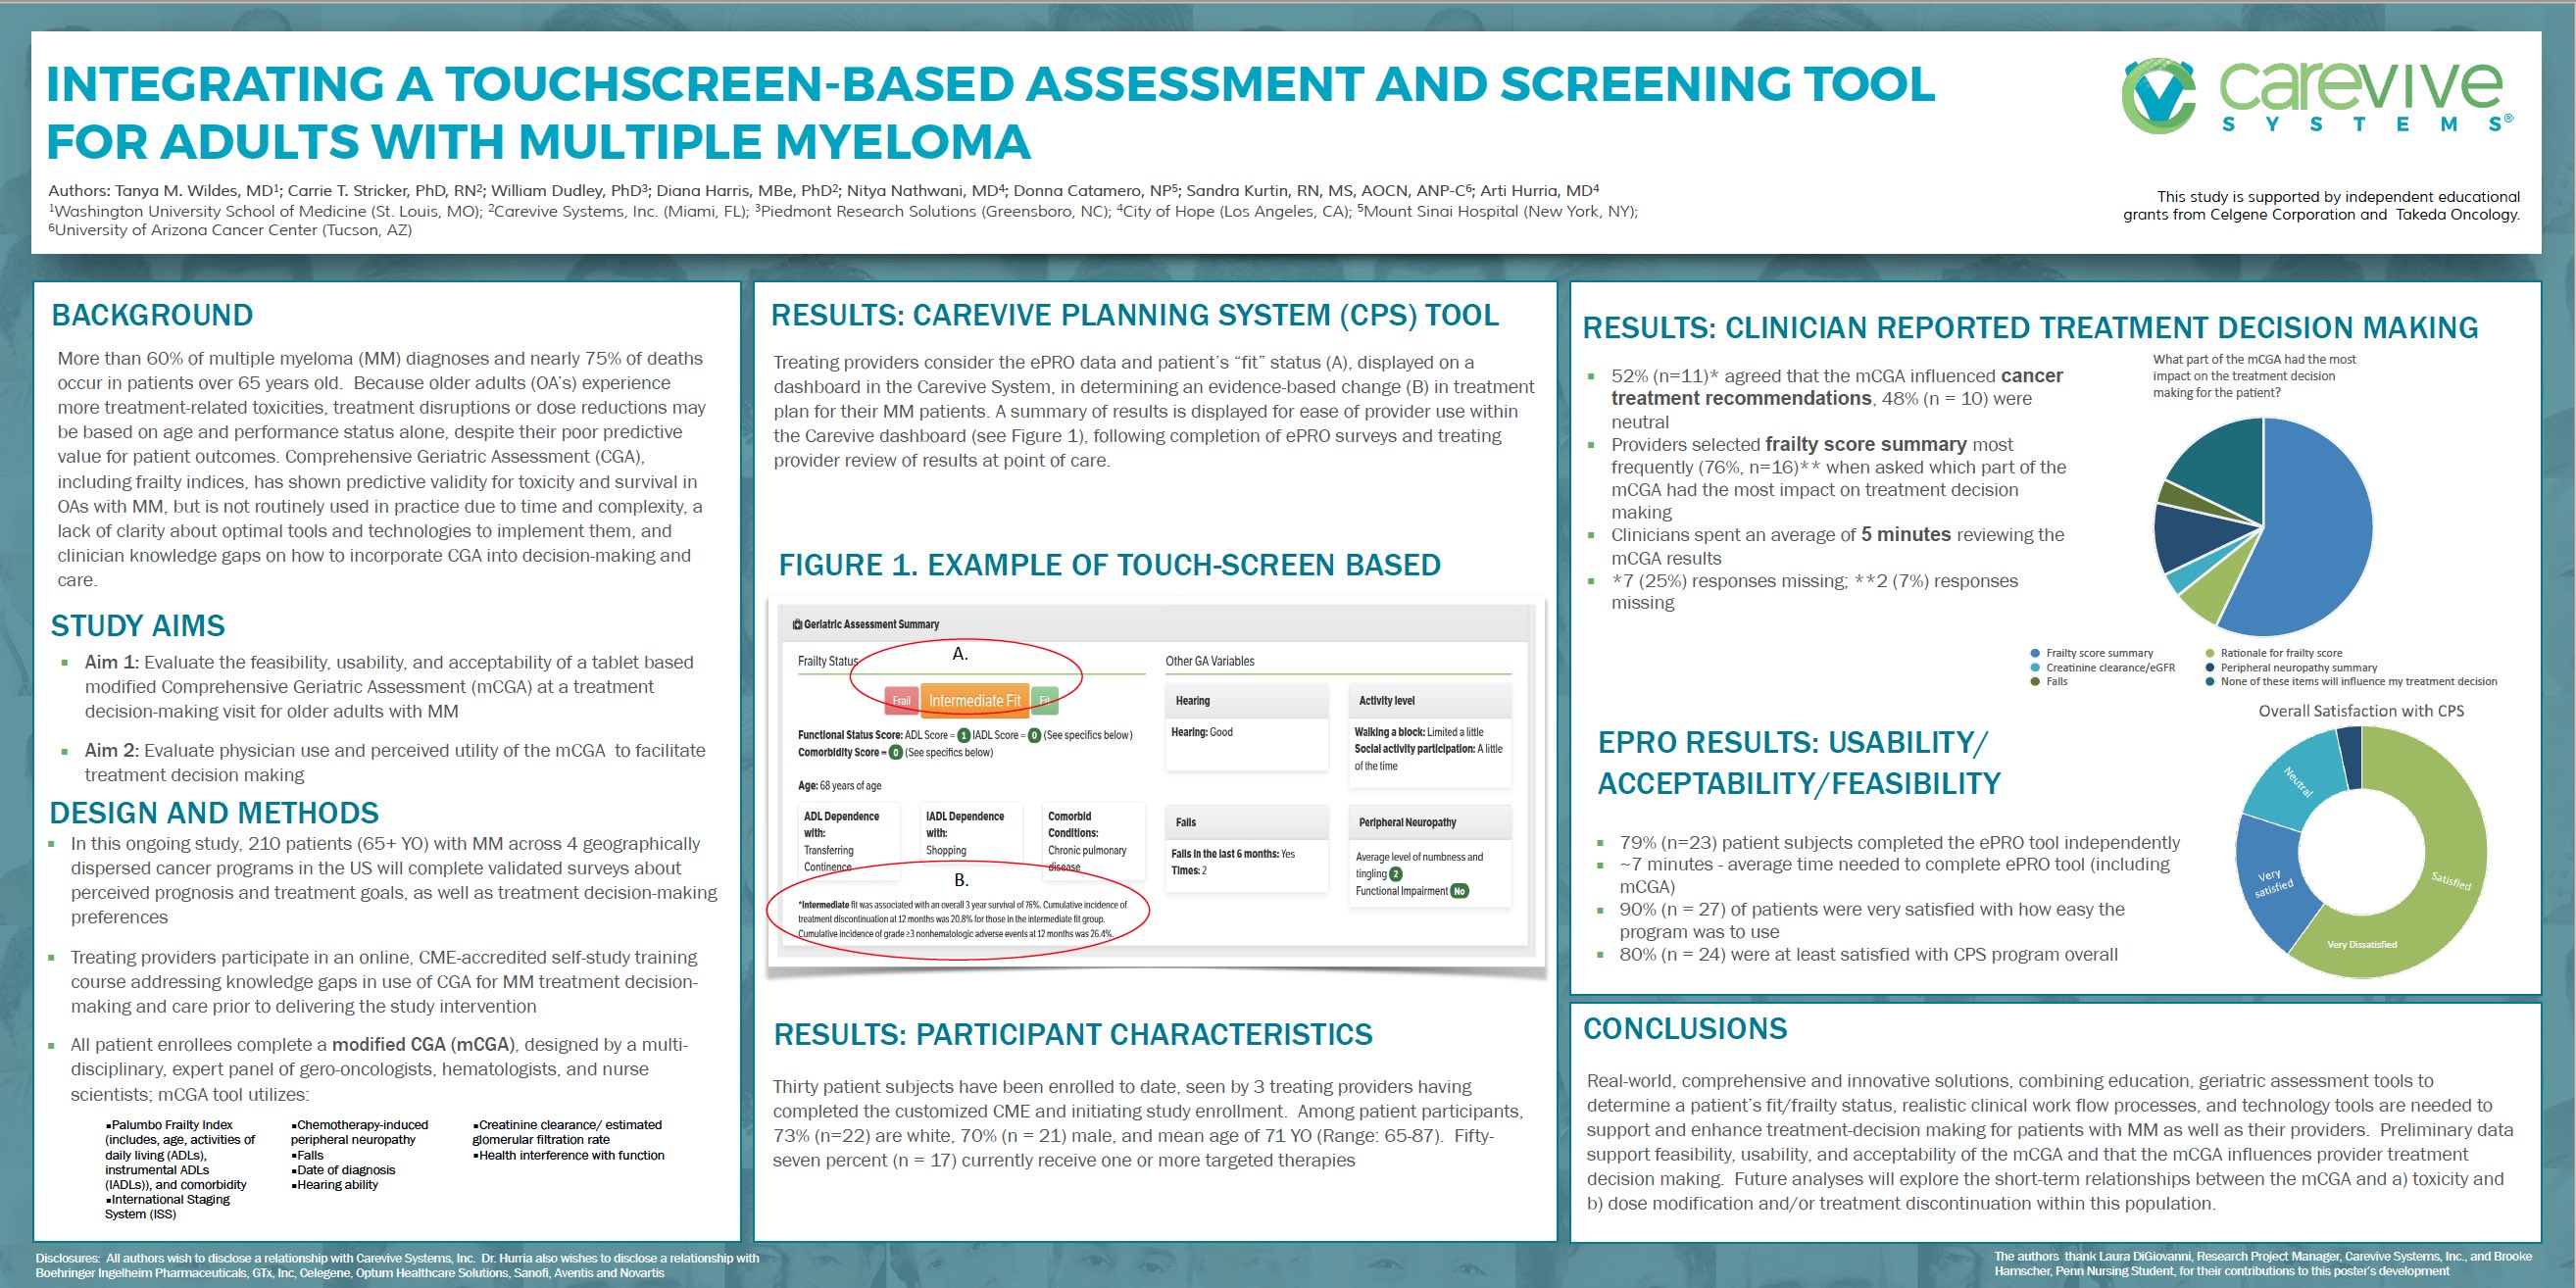 Integrating a Touchscreen-Based Assessment and Screening Tool for Adults With Multiple Myeloma